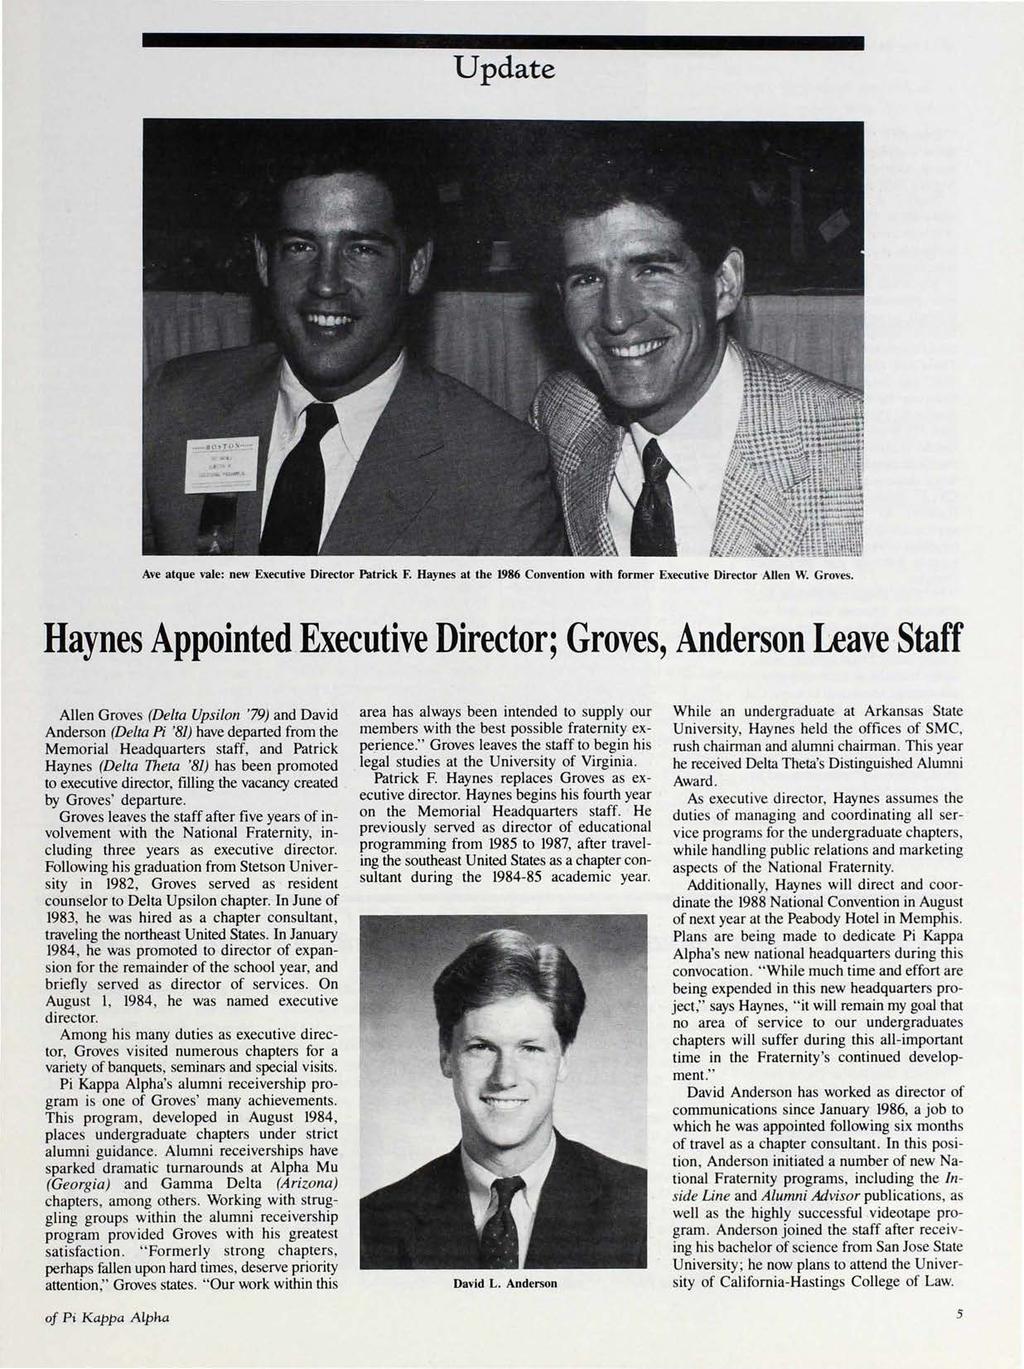 Update Ave atque vale: new Executive Director Patrick F. Haynes at the 1986 Convention with former Executive Director Allen W. Groves.